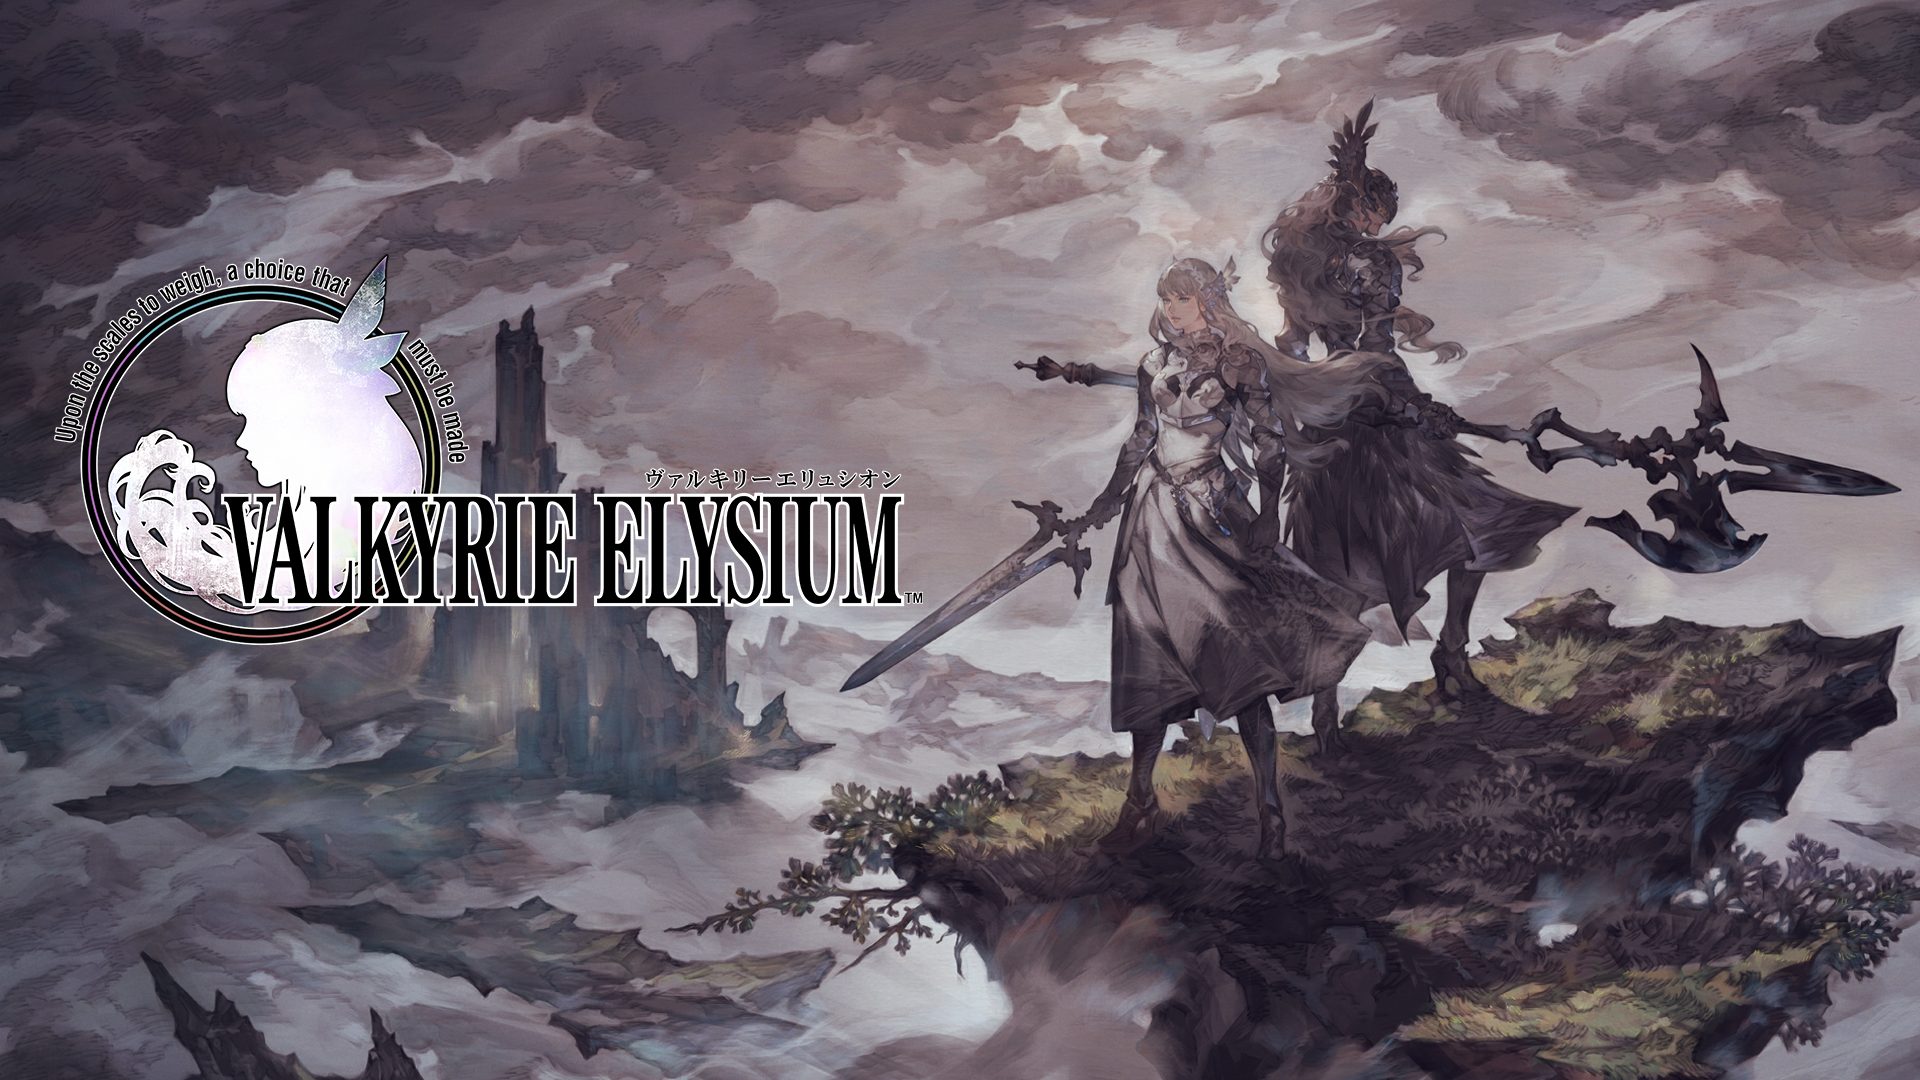 Valkyrie Elysium gets a release date and trailer